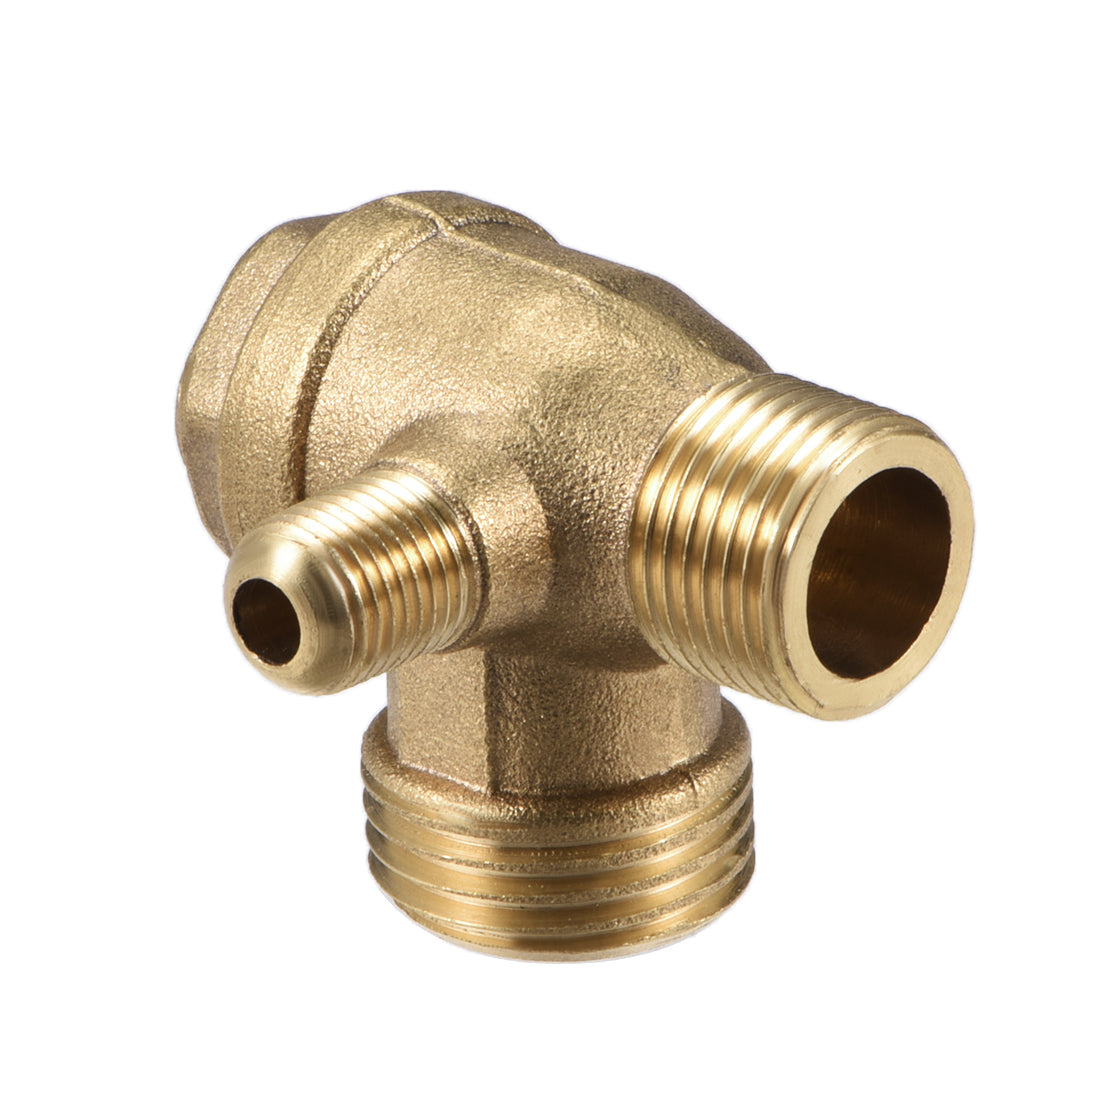 uxcell Uxcell Air Compressor Check Valve 90 Degree Male Threaded Brass 3/8PTx1/2PTxM10 2Pcs